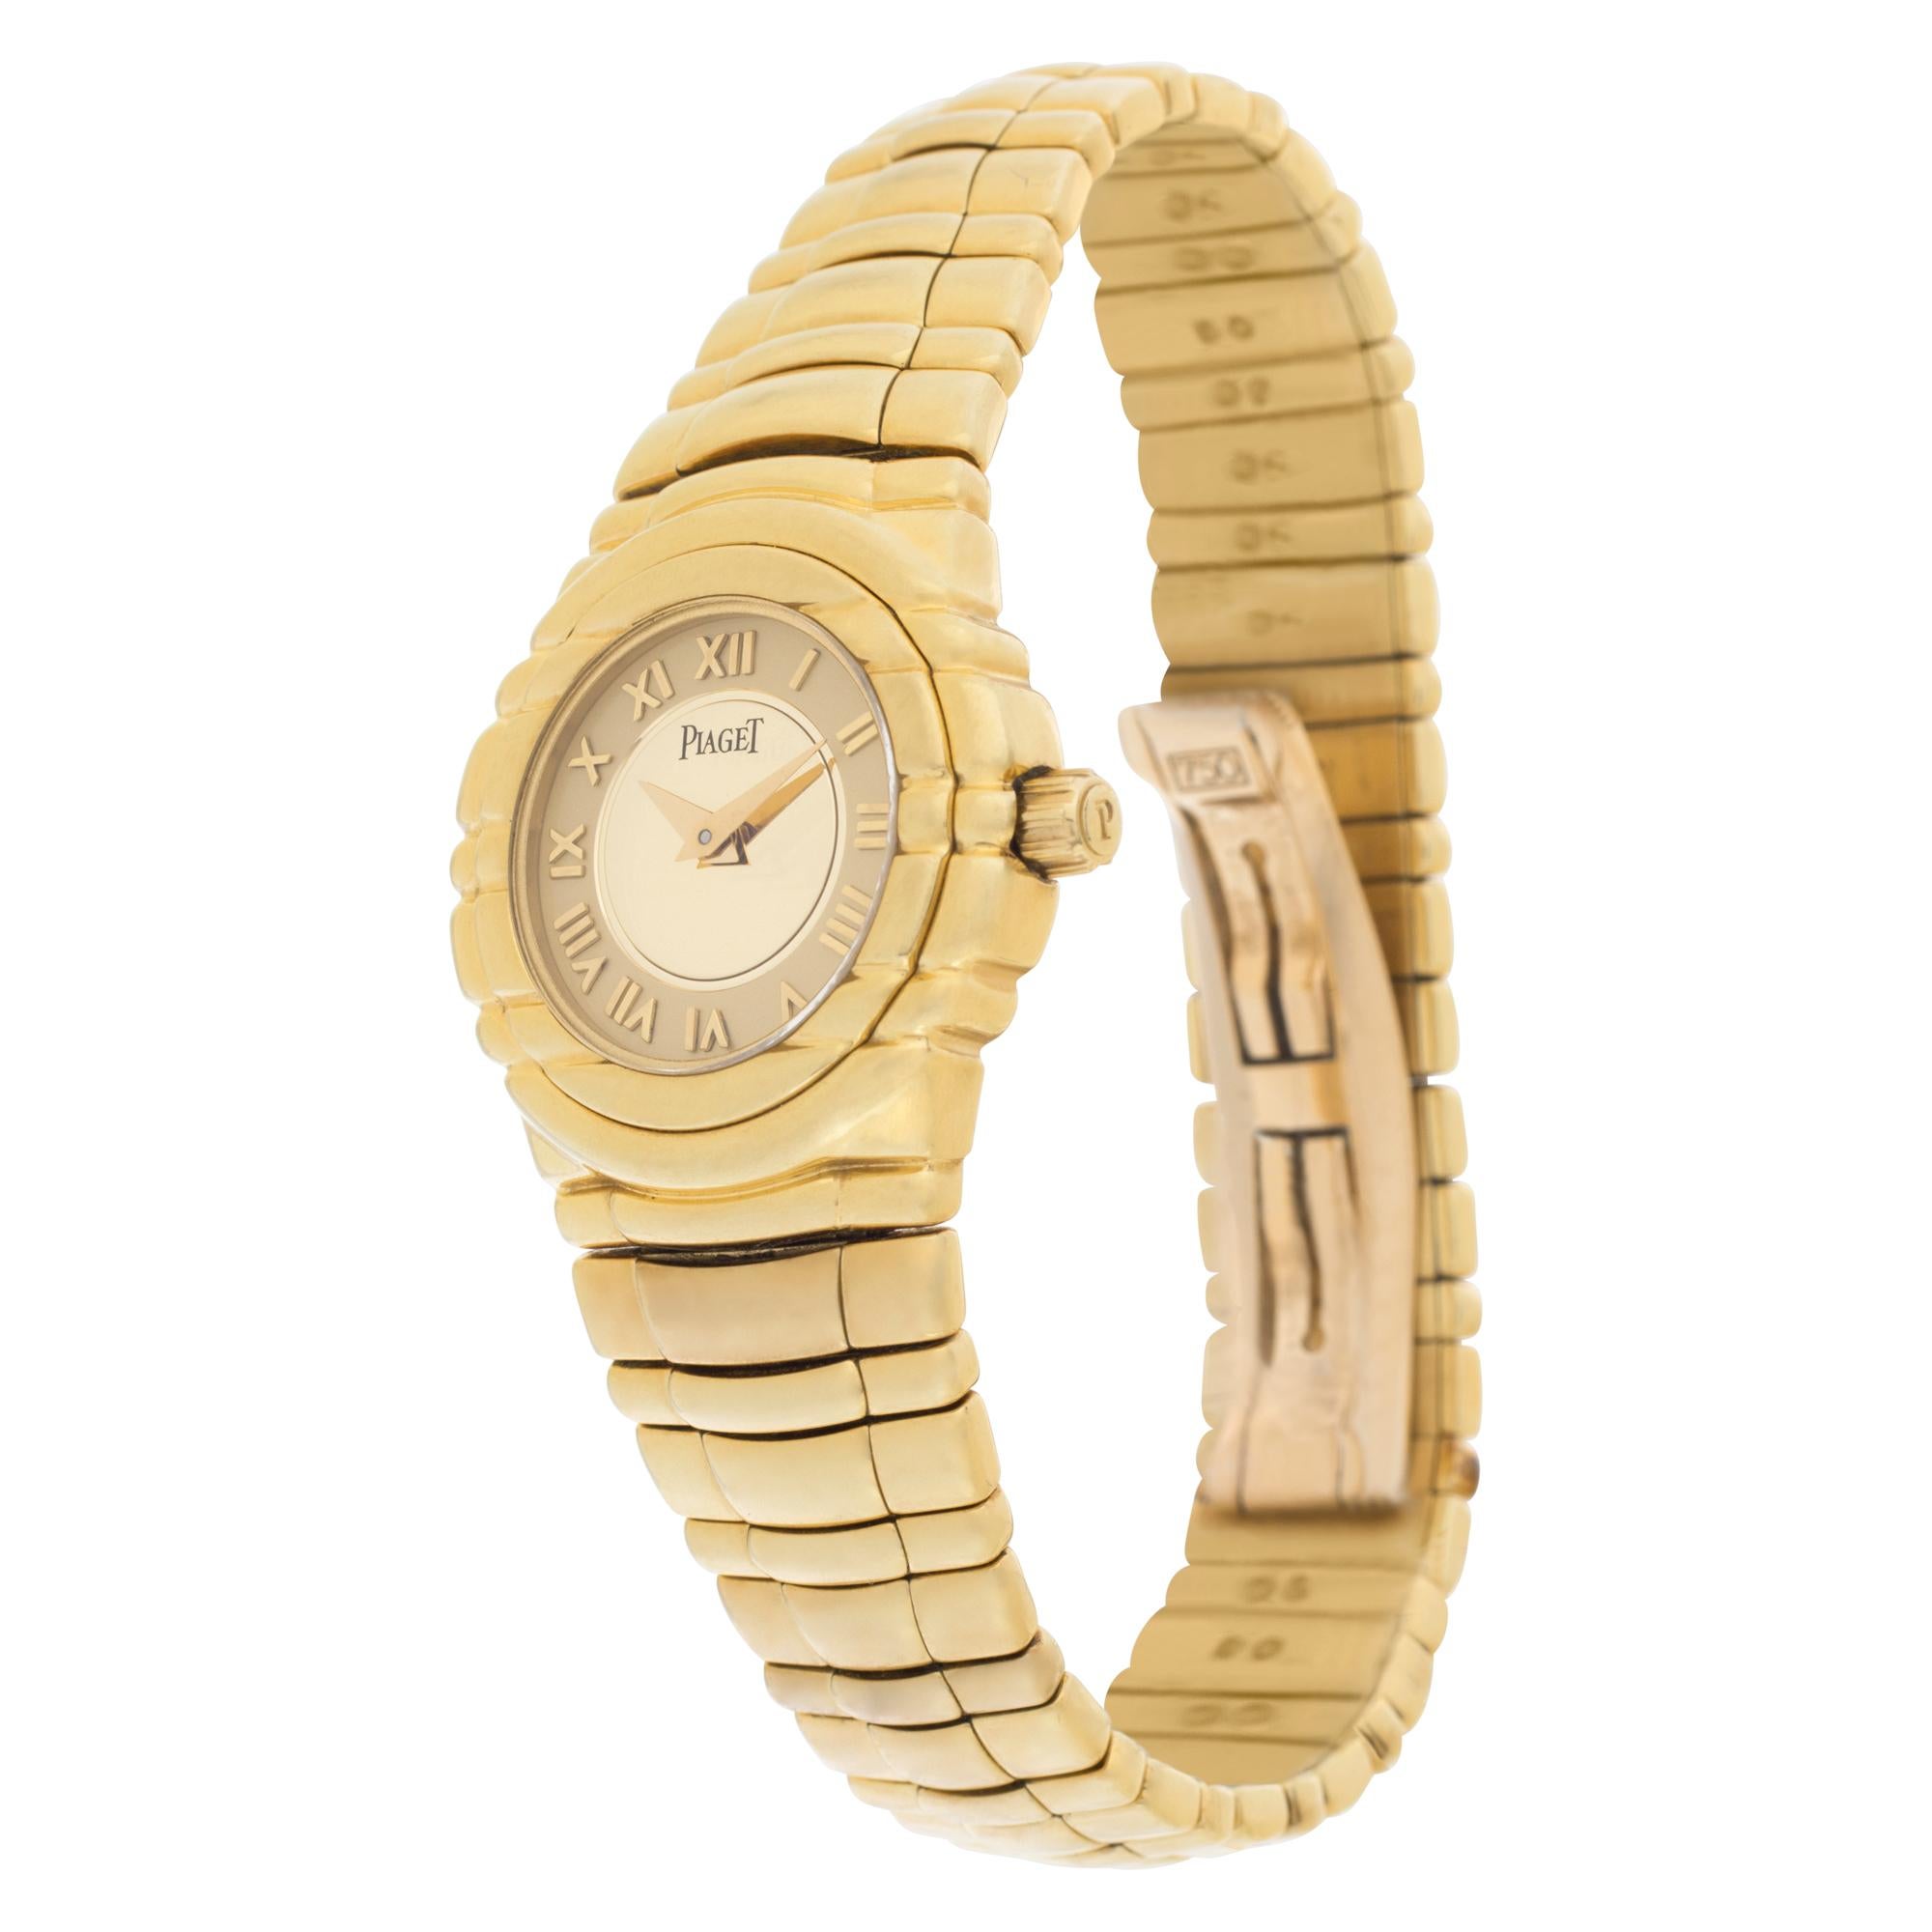 Piaget Tanagra in 18k yellow gold with Roman numeral dial. Quartz. 25 mm case size. Complete with box & papers. Ref 16031M401D. Fine Pre-owned Piaget Watch.

Certified preowned Dress Piaget Tanagra 16031M401D watch is made out of yellow gold on a